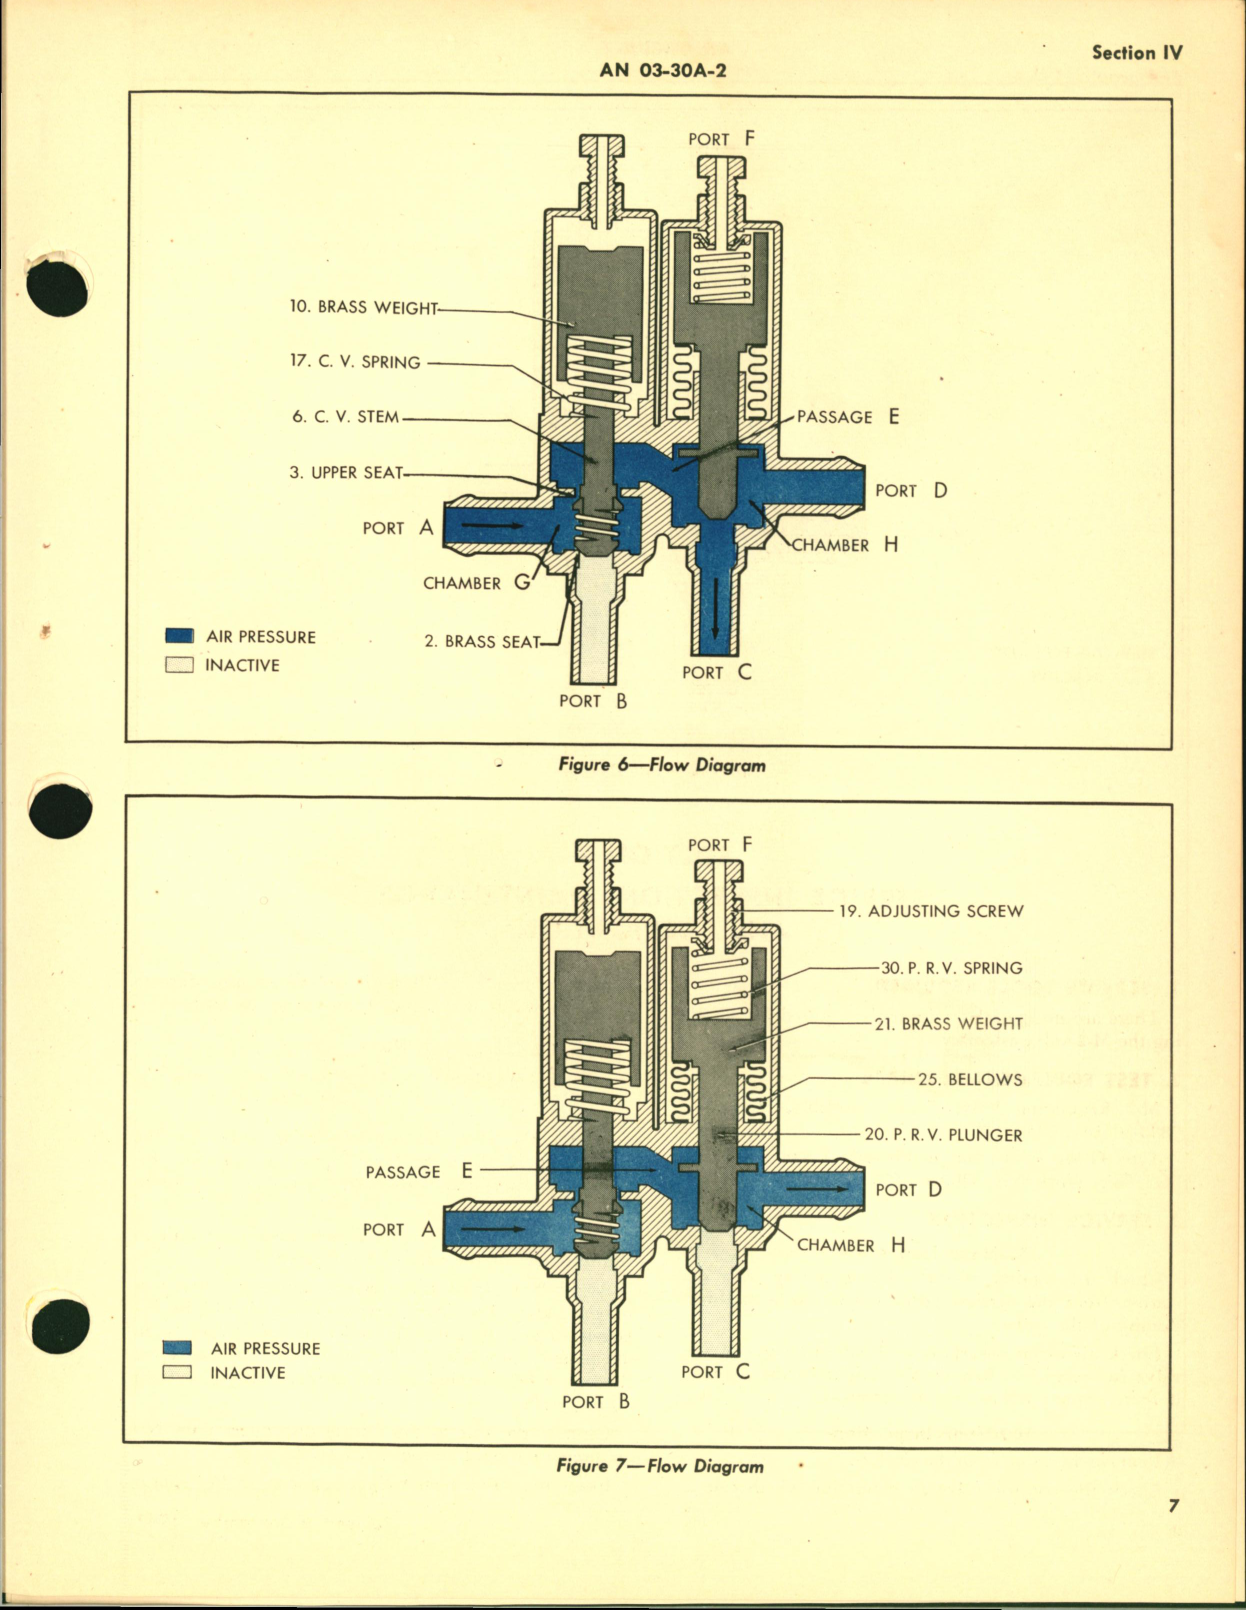 Sample page 5 from AirCorps Library document: Operation and Service Instructions for Pressure Regulating Valve Type M-2